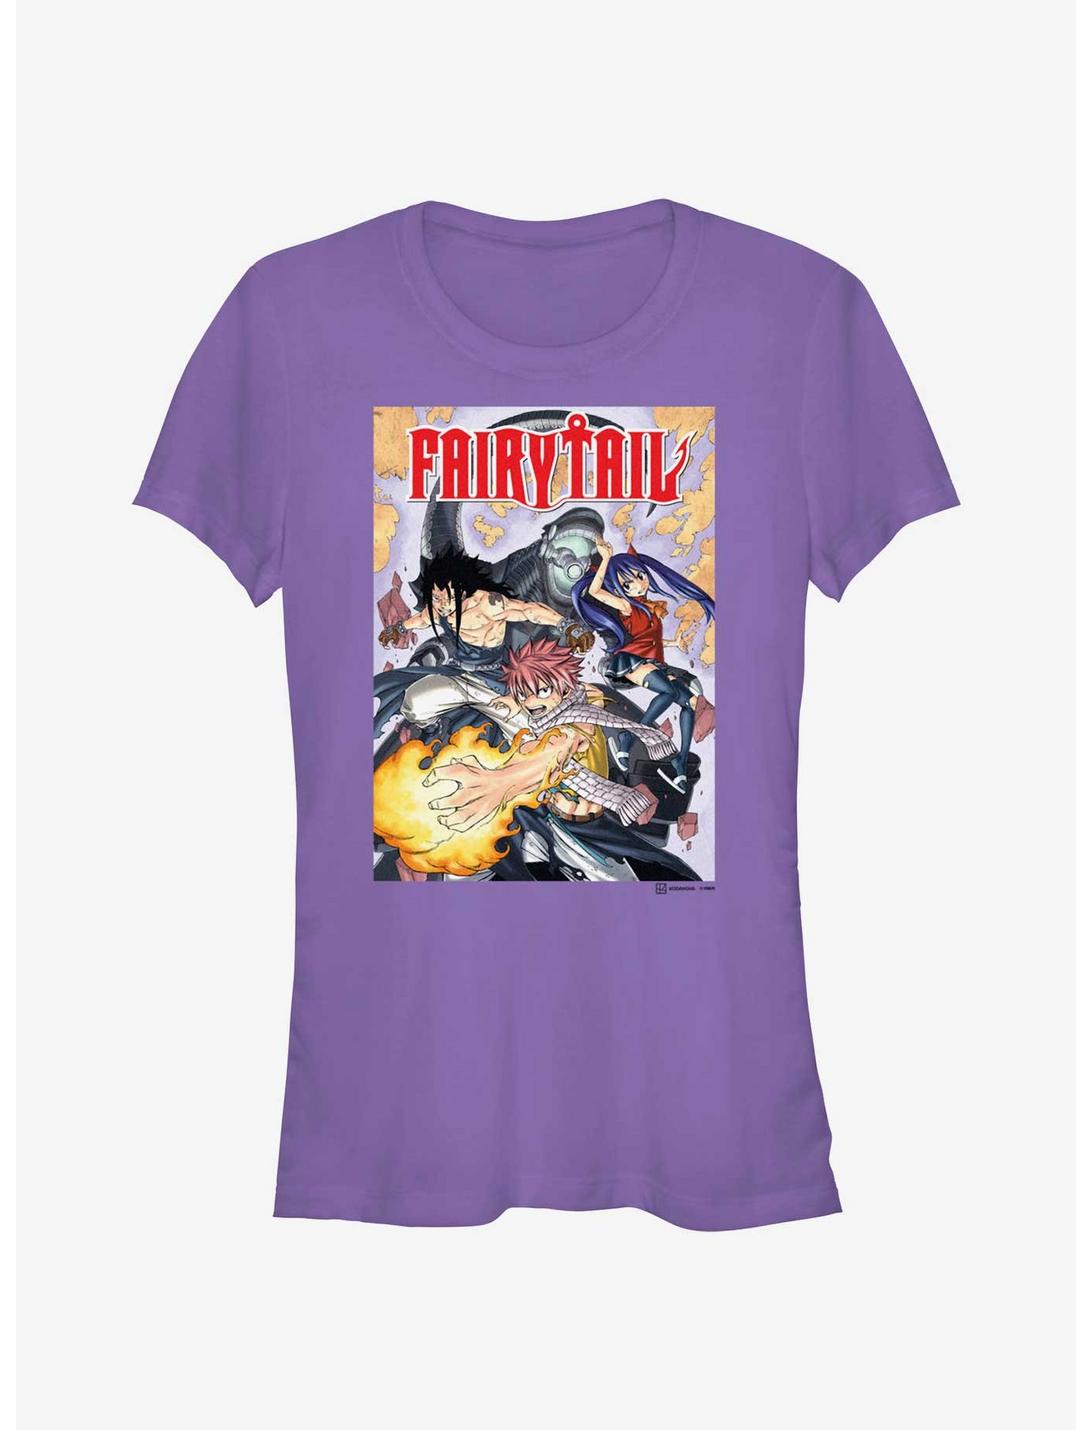 Fairy Tail Cover 2 Girls T-Shirt, PURPLE, hi-res